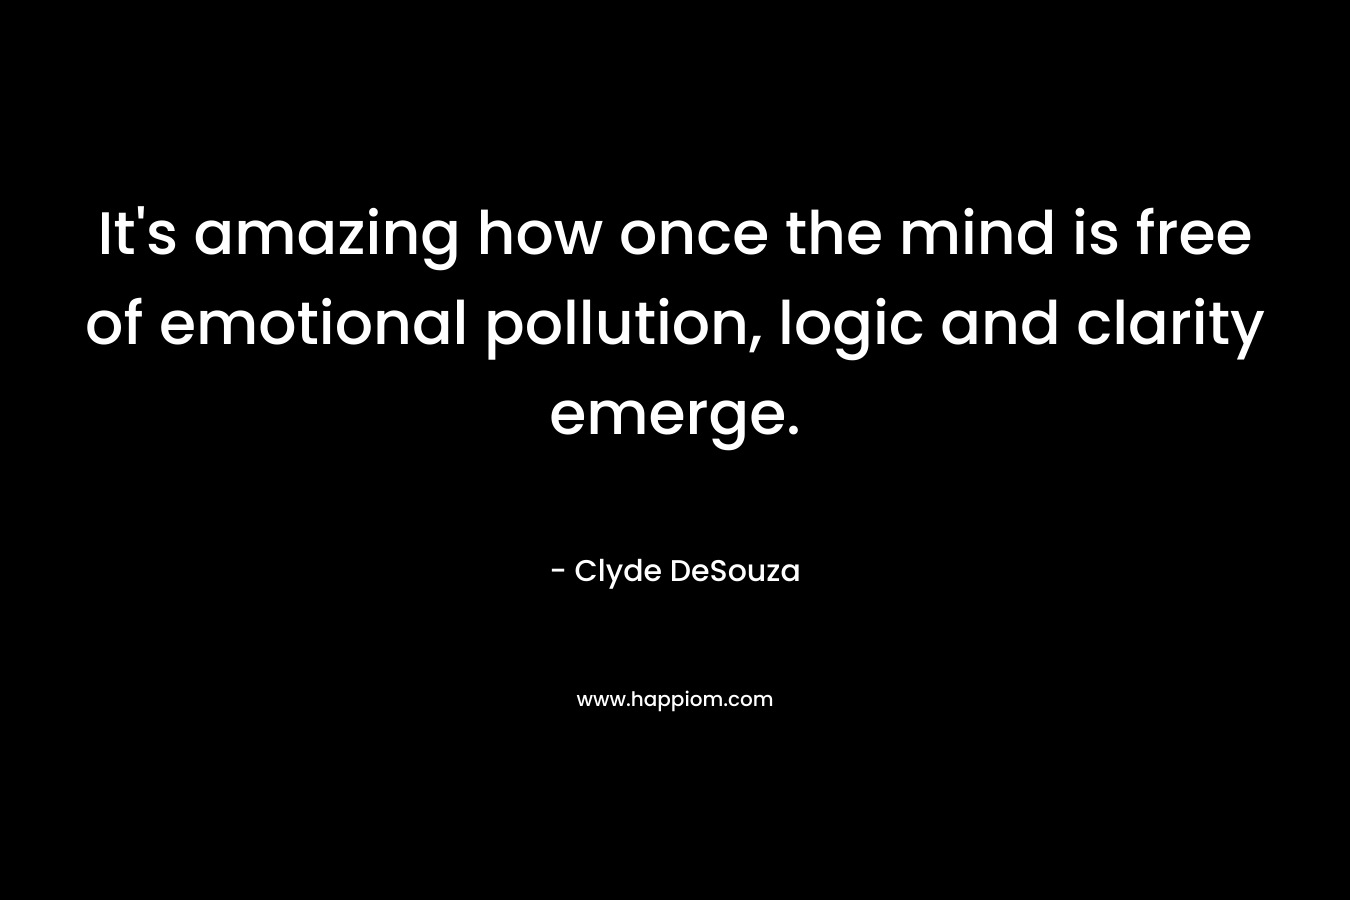 It’s amazing how once the mind is free of emotional pollution, logic and clarity emerge. – Clyde DeSouza